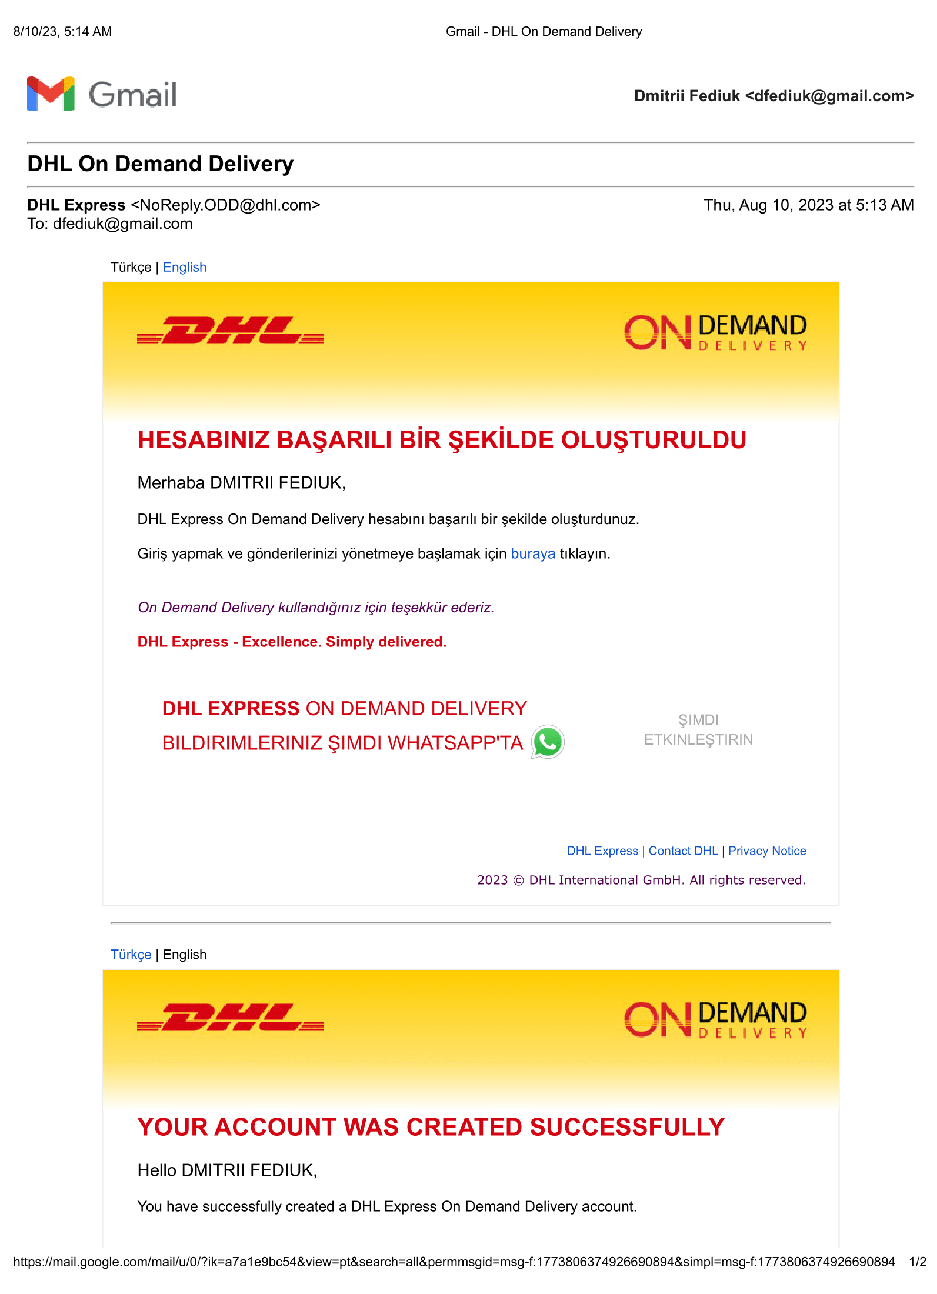 Gmail - DHL On Demand Delivery-1